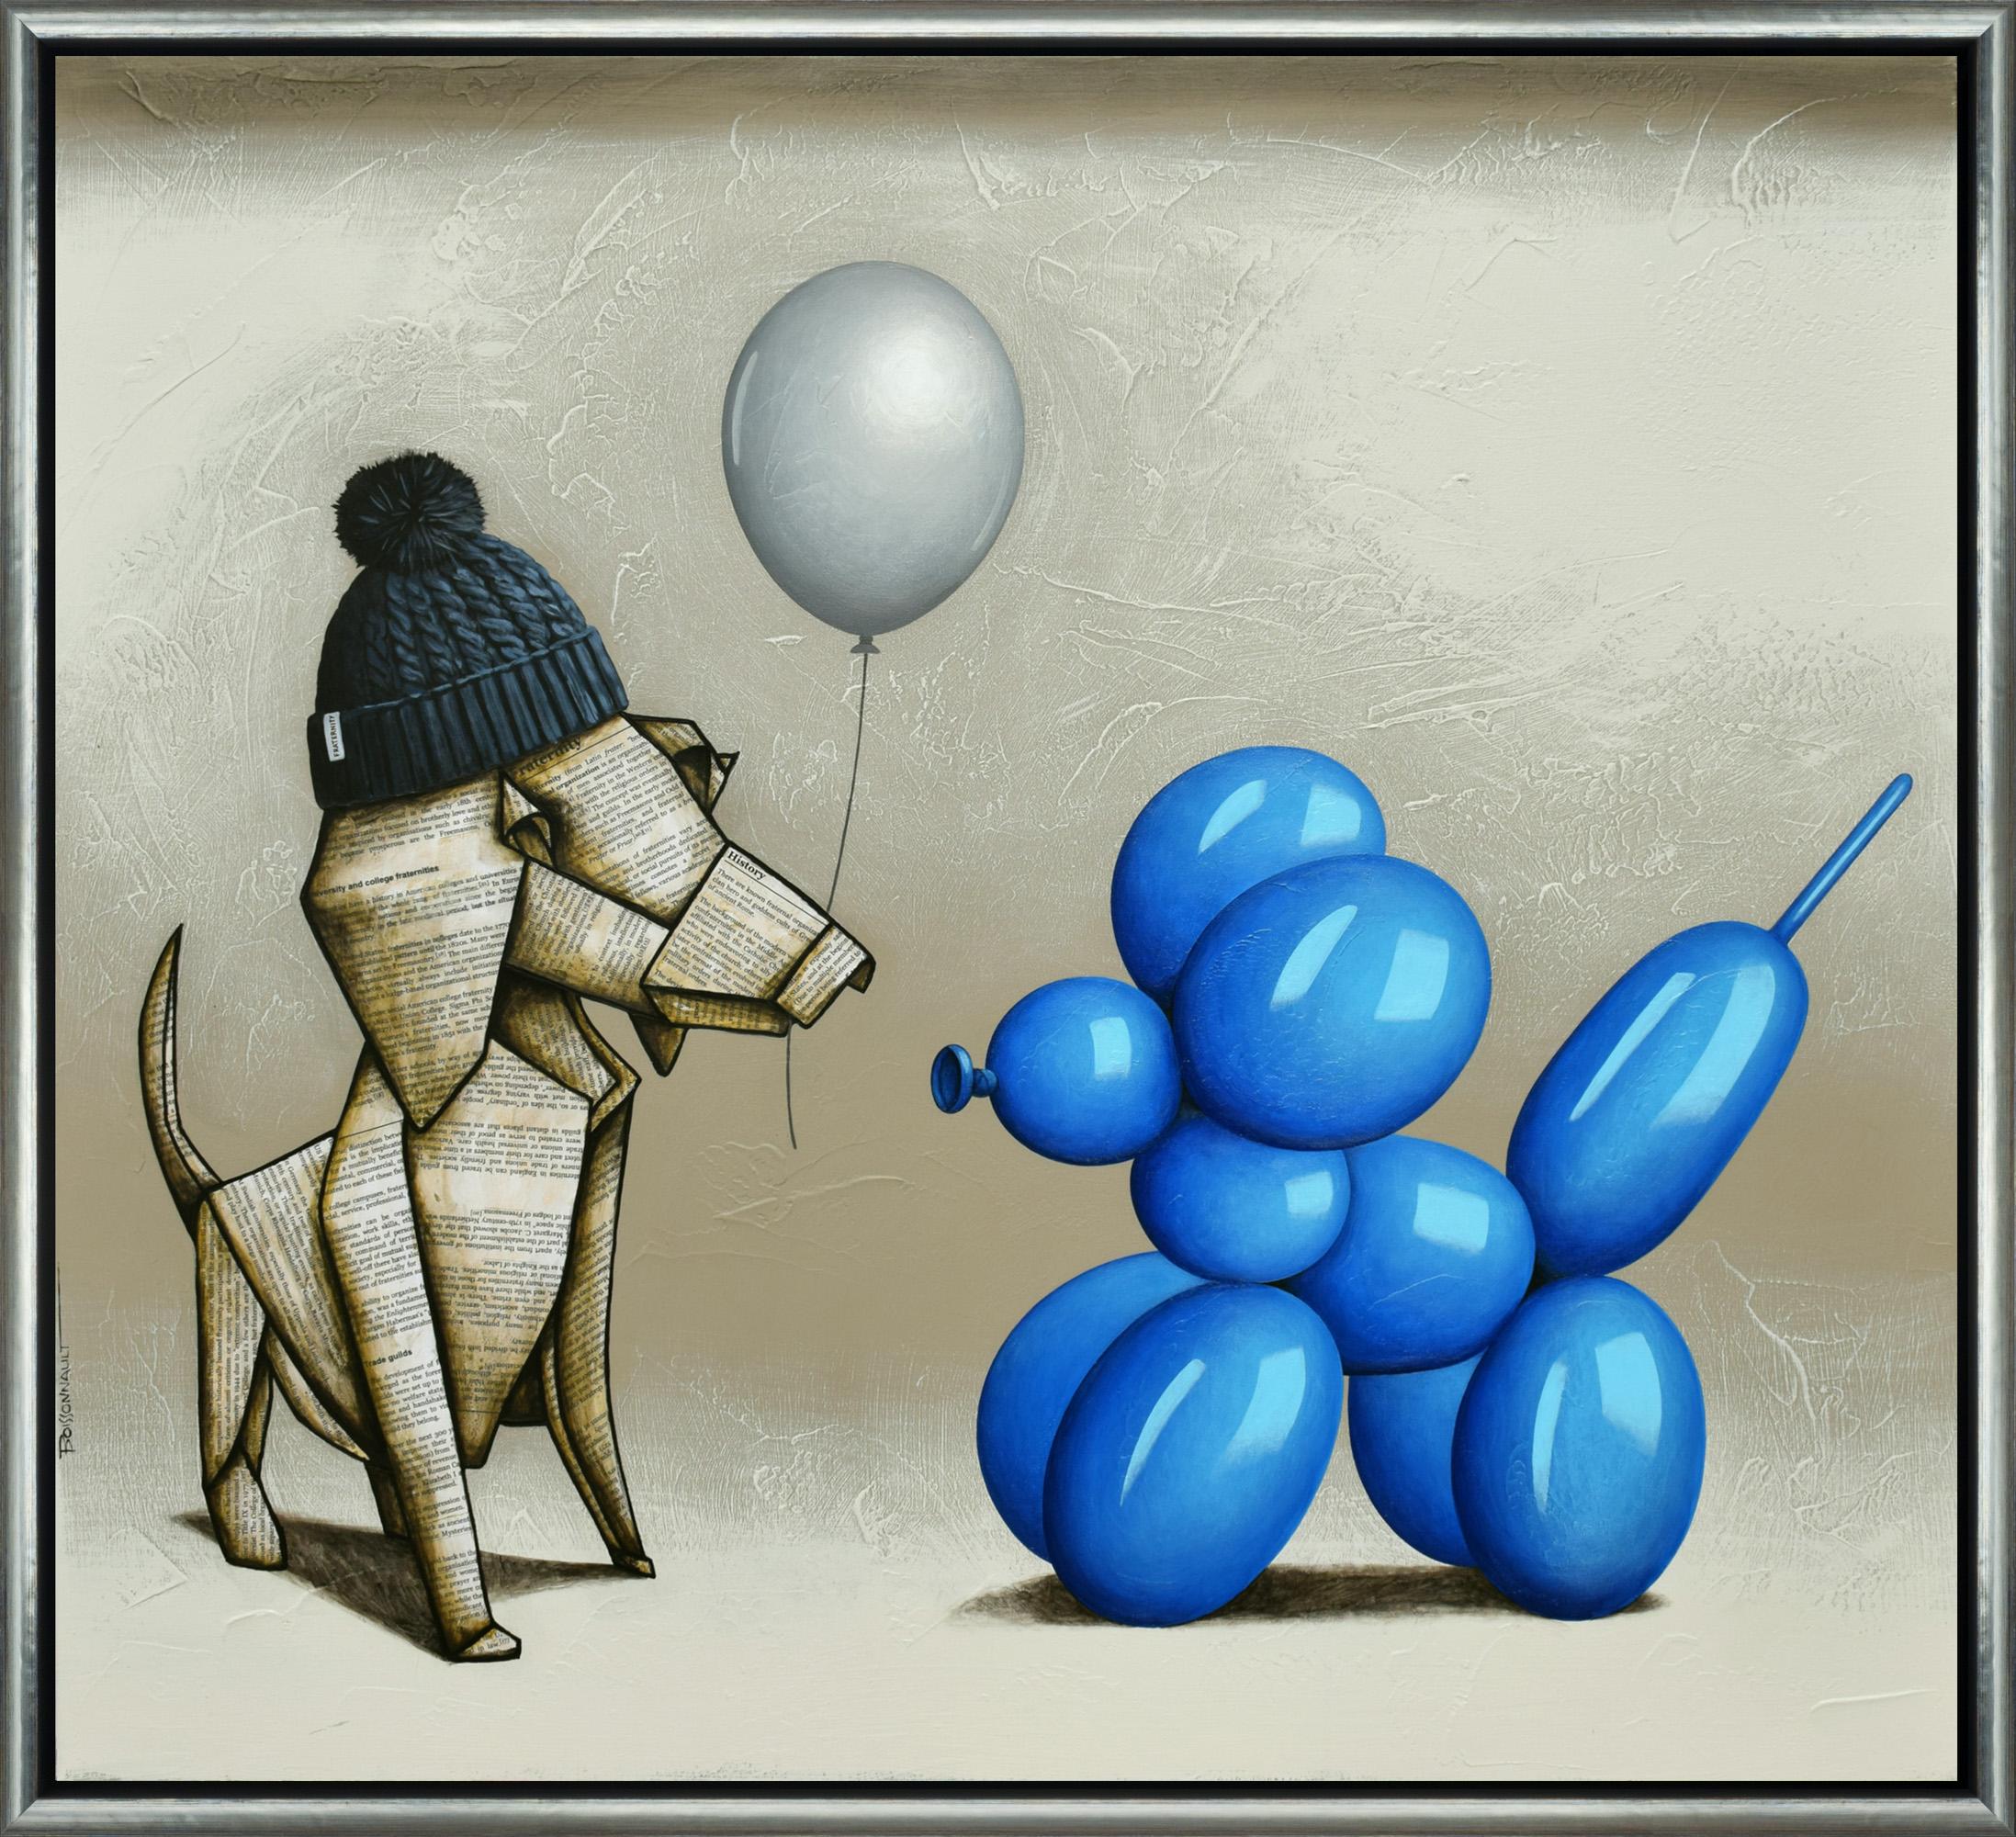 "Fraternity" Textured Mixed Media Dog with Bright Blue Balloon Animal Dog  - Mixed Media Art by Nathalie Boissonnault